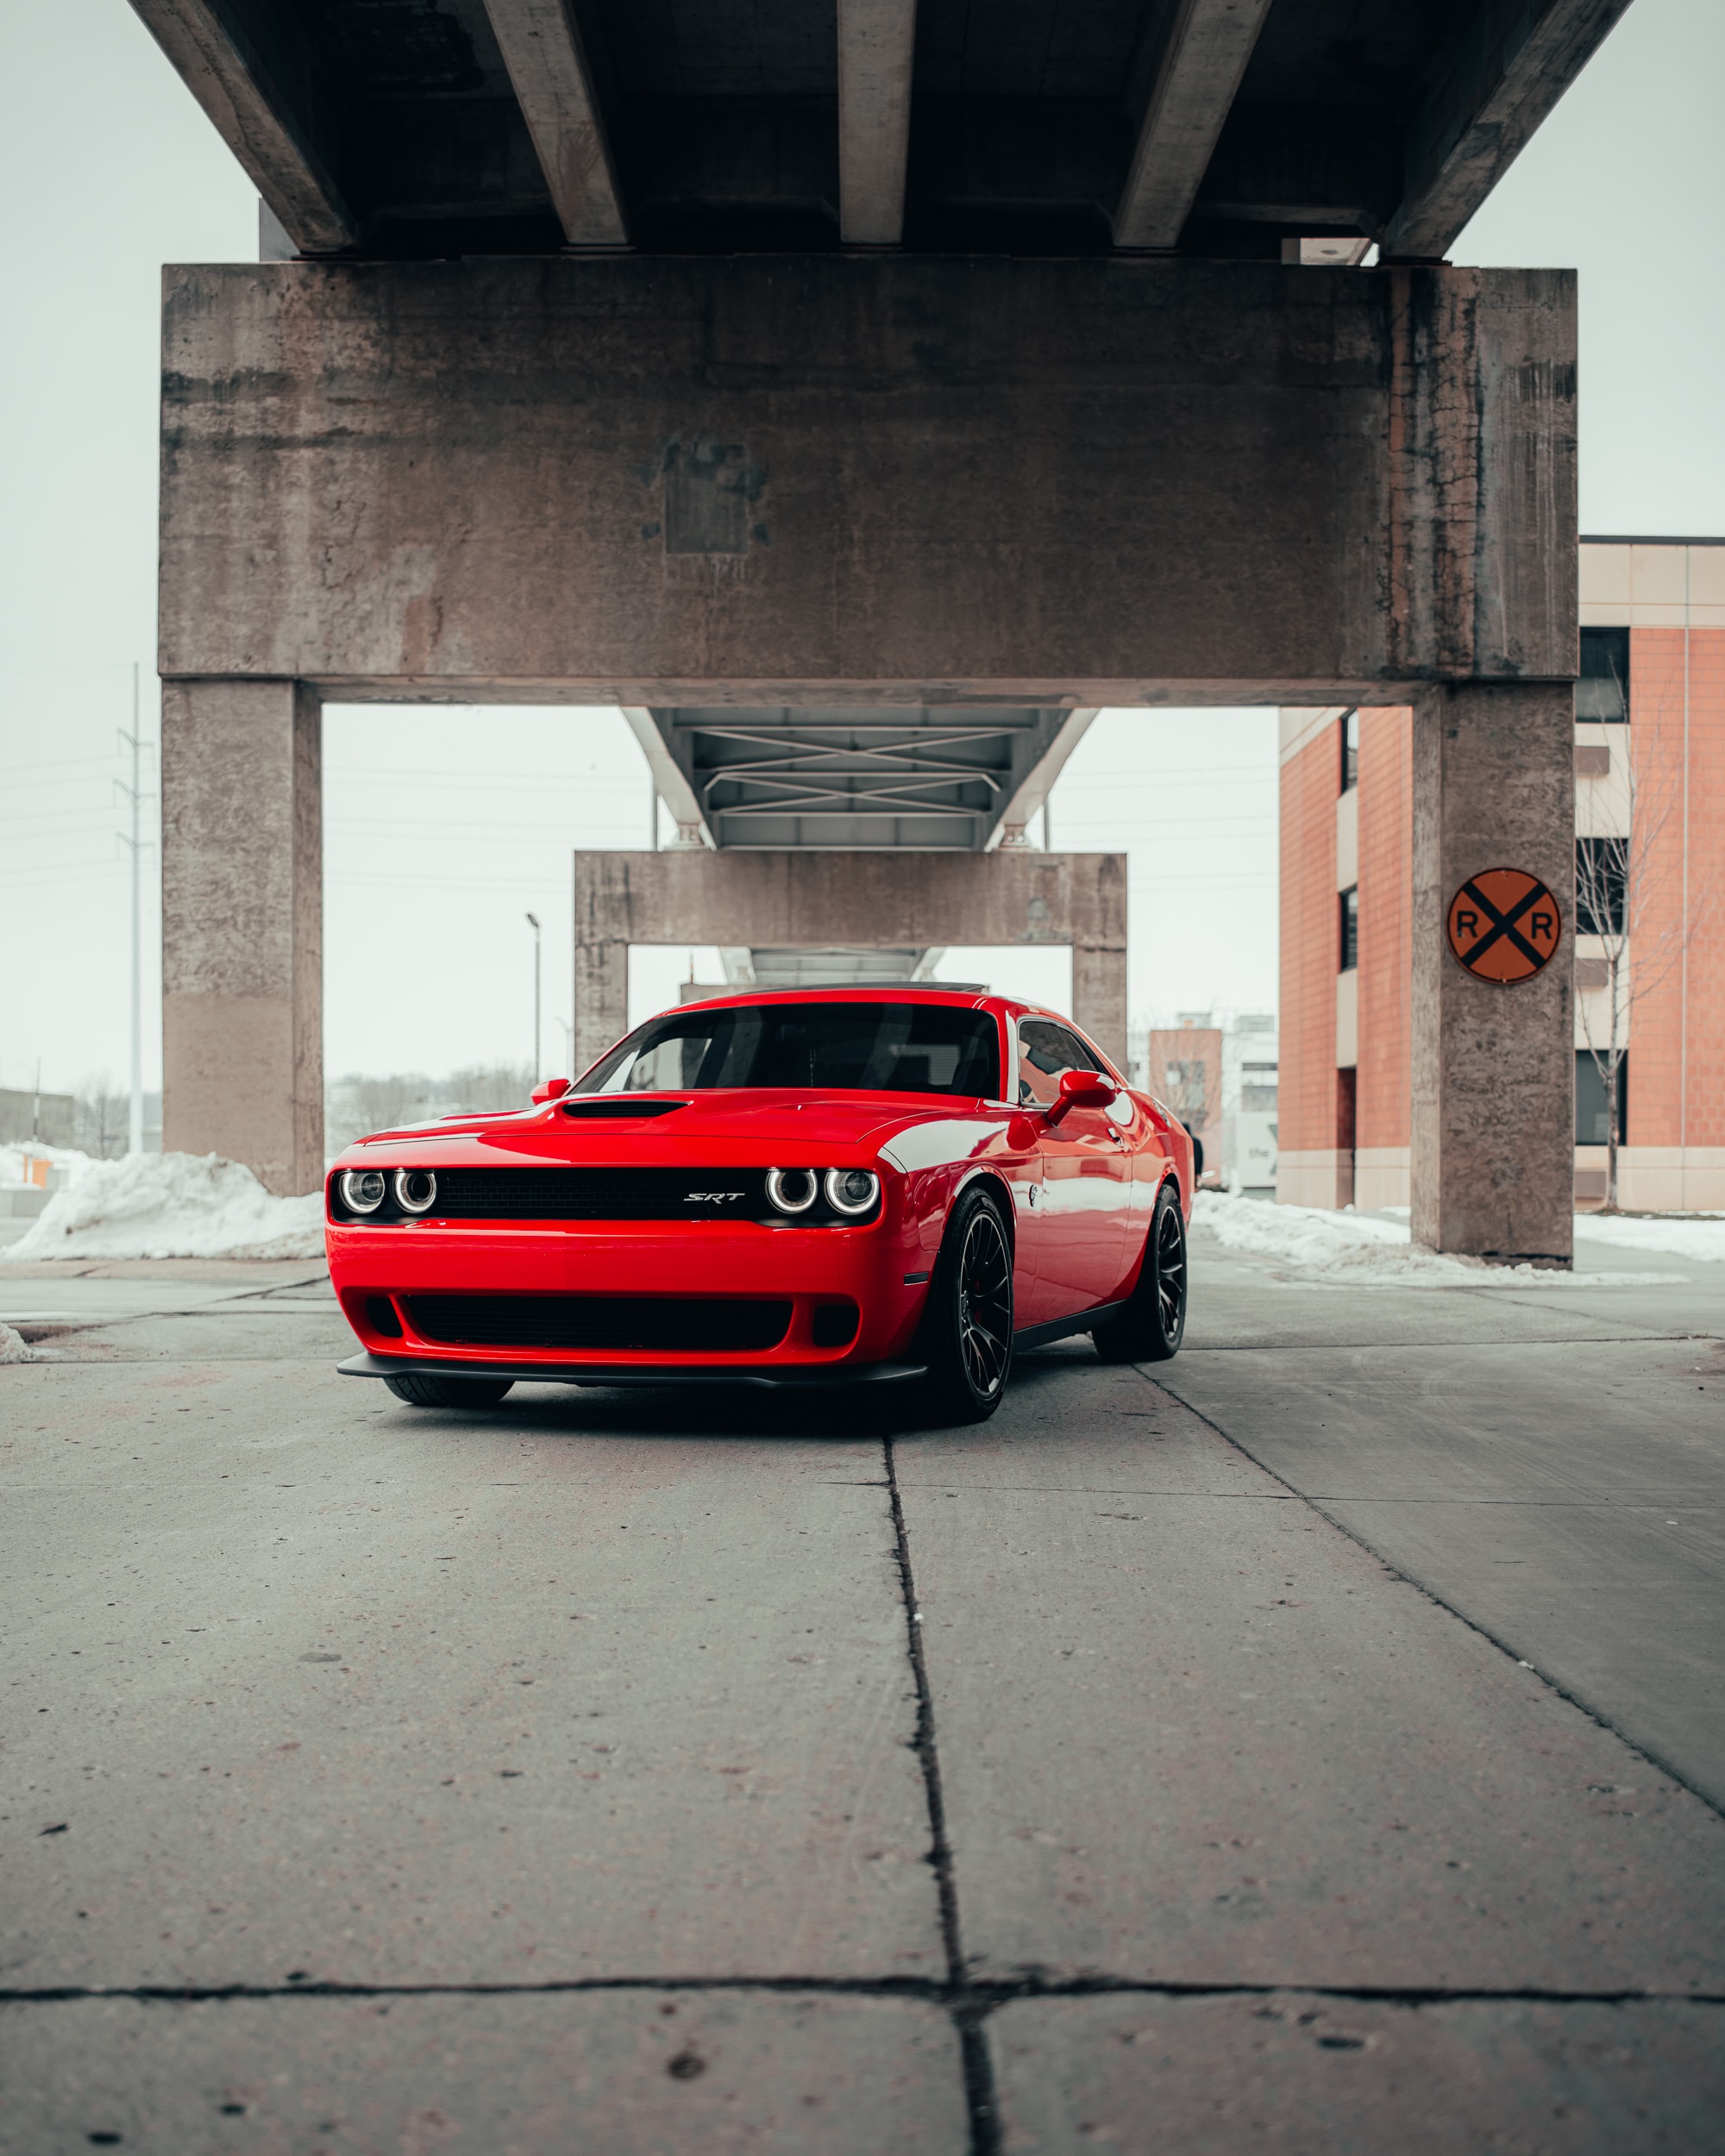 HD wallpaper cars, front view, car, sports car, dodge, dodge challenger srt, red, sports